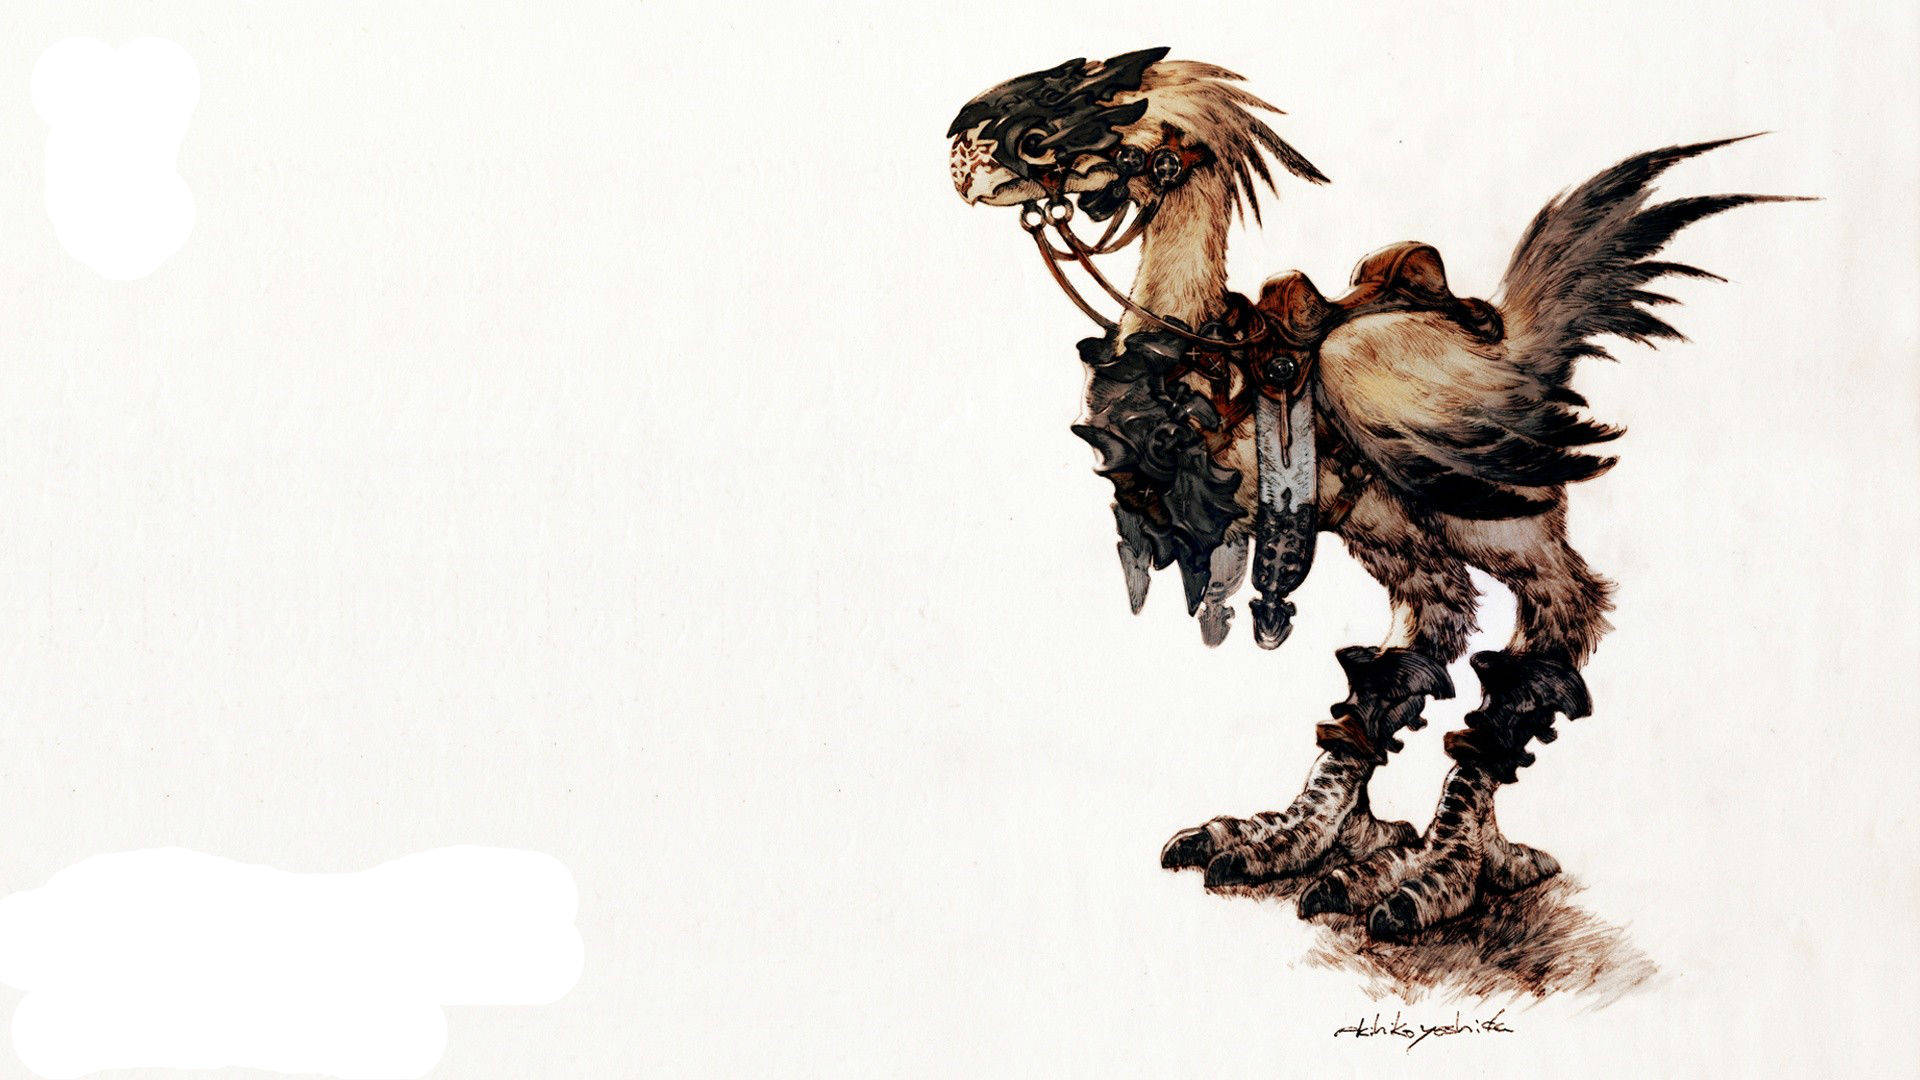 Chocobo Wallpapers